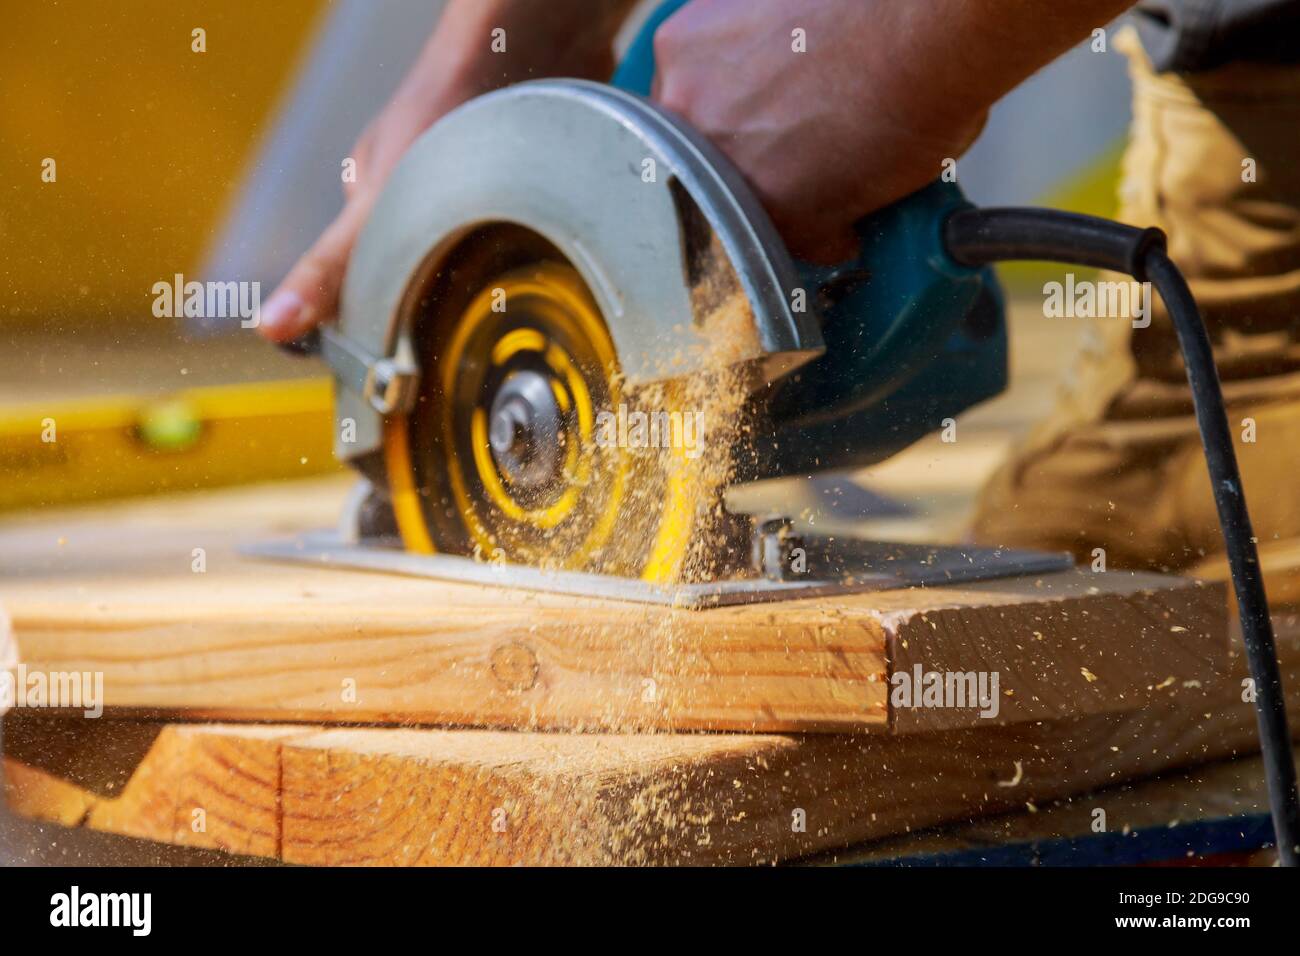 Carpenter using circular saw for cutting wooden boards with hand power tools. Stock Photo